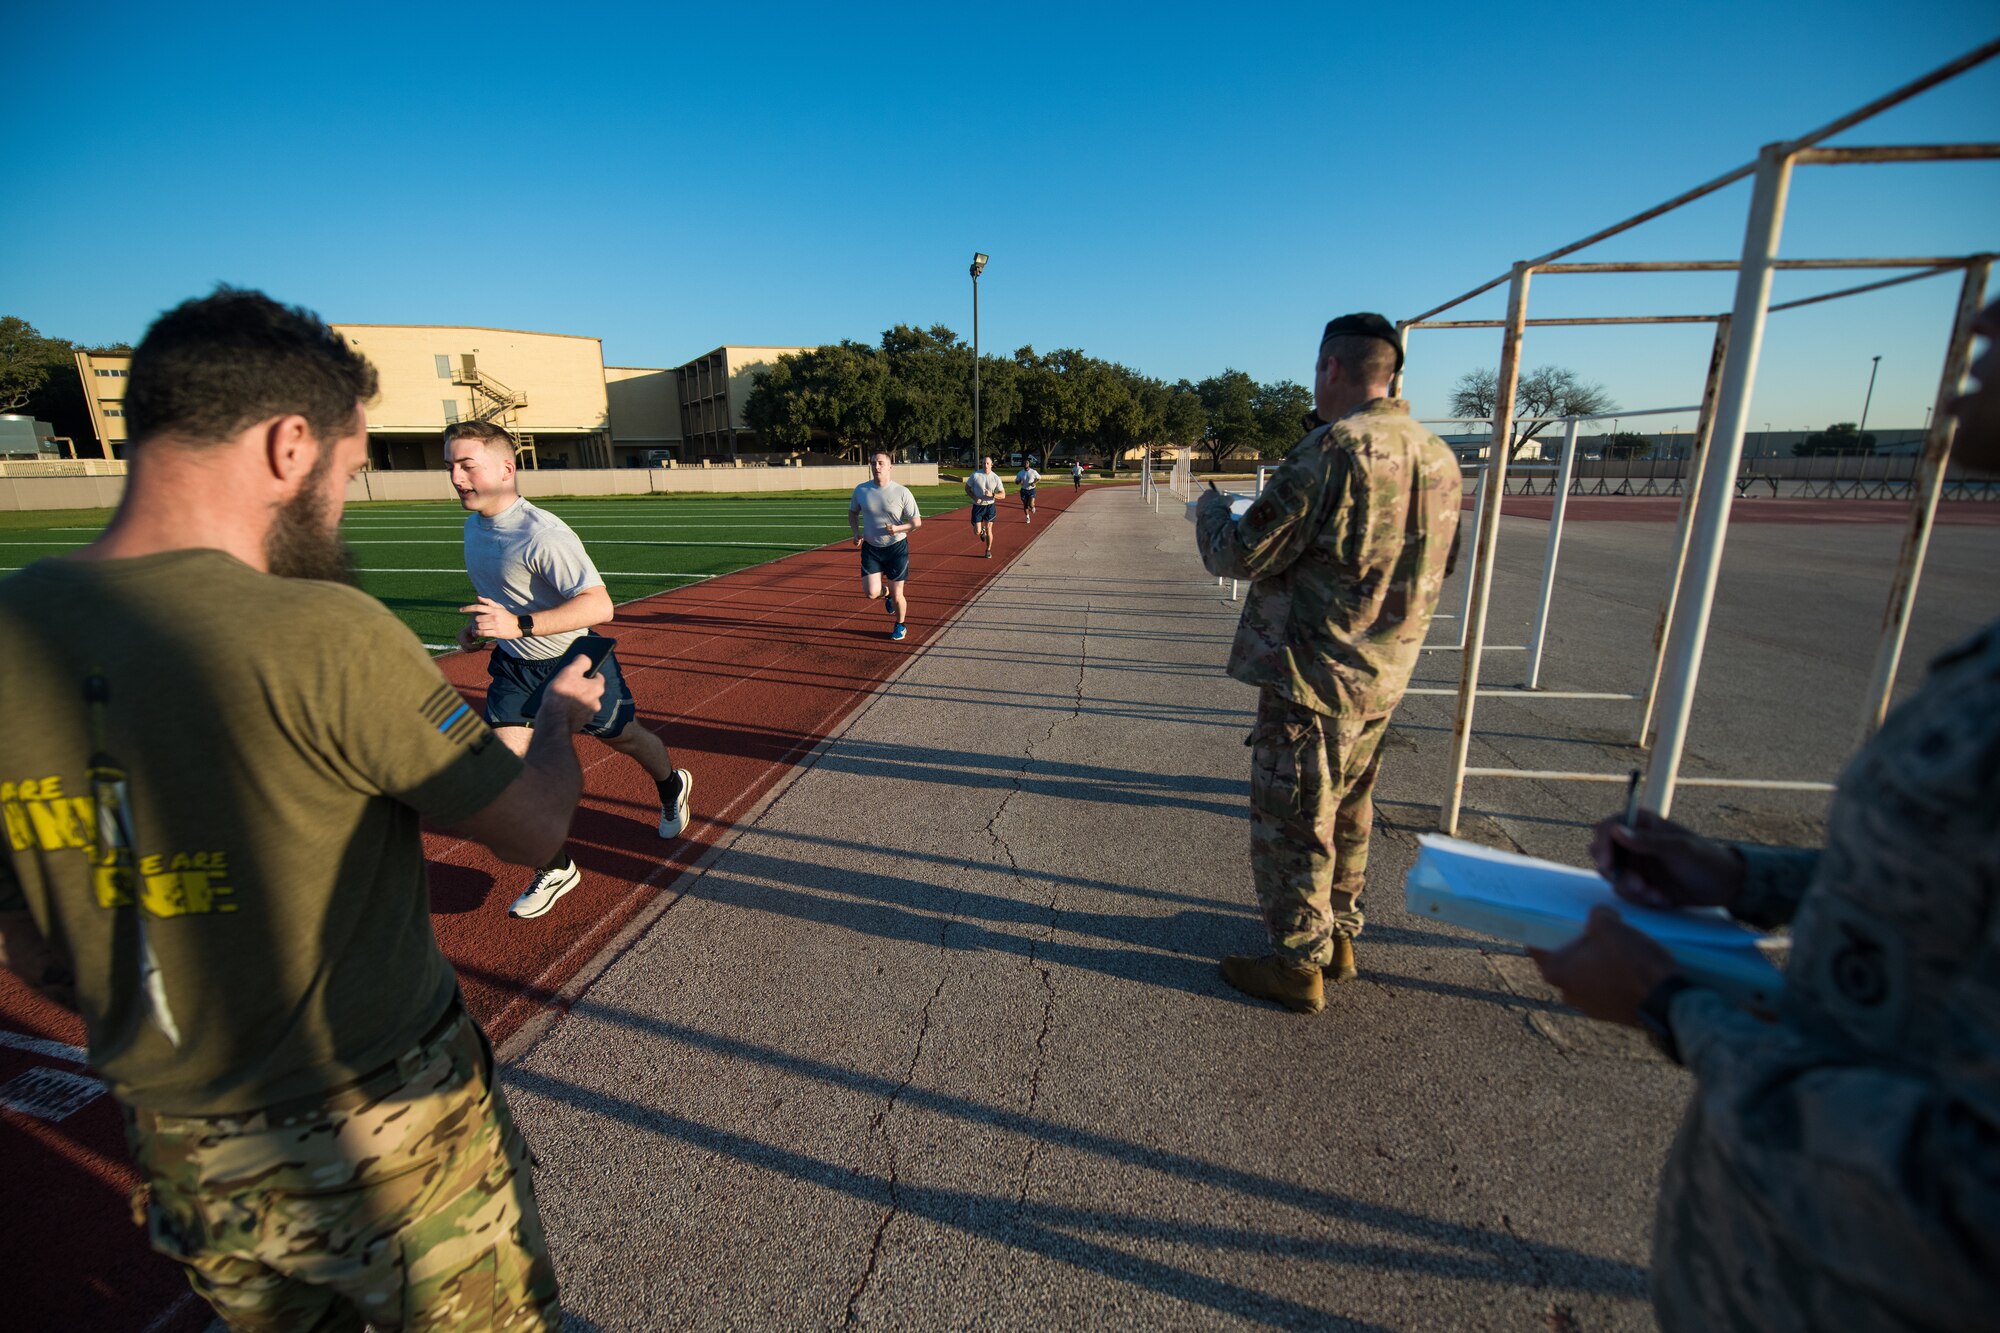 U.S. Air Force Security Forces Airmen take part in the run portion of a physical fitness test as the opening day of the Air Education and Training Command Defender Challenge team tryout at Joint Base San Antonio-Lackland, Texas, Jan. 27, 2020. The five-day selection camp includes a physical fitness test, M-9 and M-4 weapons firing, the alpha warrior obstacle course, a ruck march and also includes a military working dog tryout as well. A total of 27 Airmen, including five MWD handlers and their canine partners, were invited to tryout for the team. The seven selectees to the AETC team will represent the First Command at the career field’s world-wide competition that will be held at JBSA-Camp Bullis in May 2020. (U.S. Air Force photo by Sarayuth Pinthong)